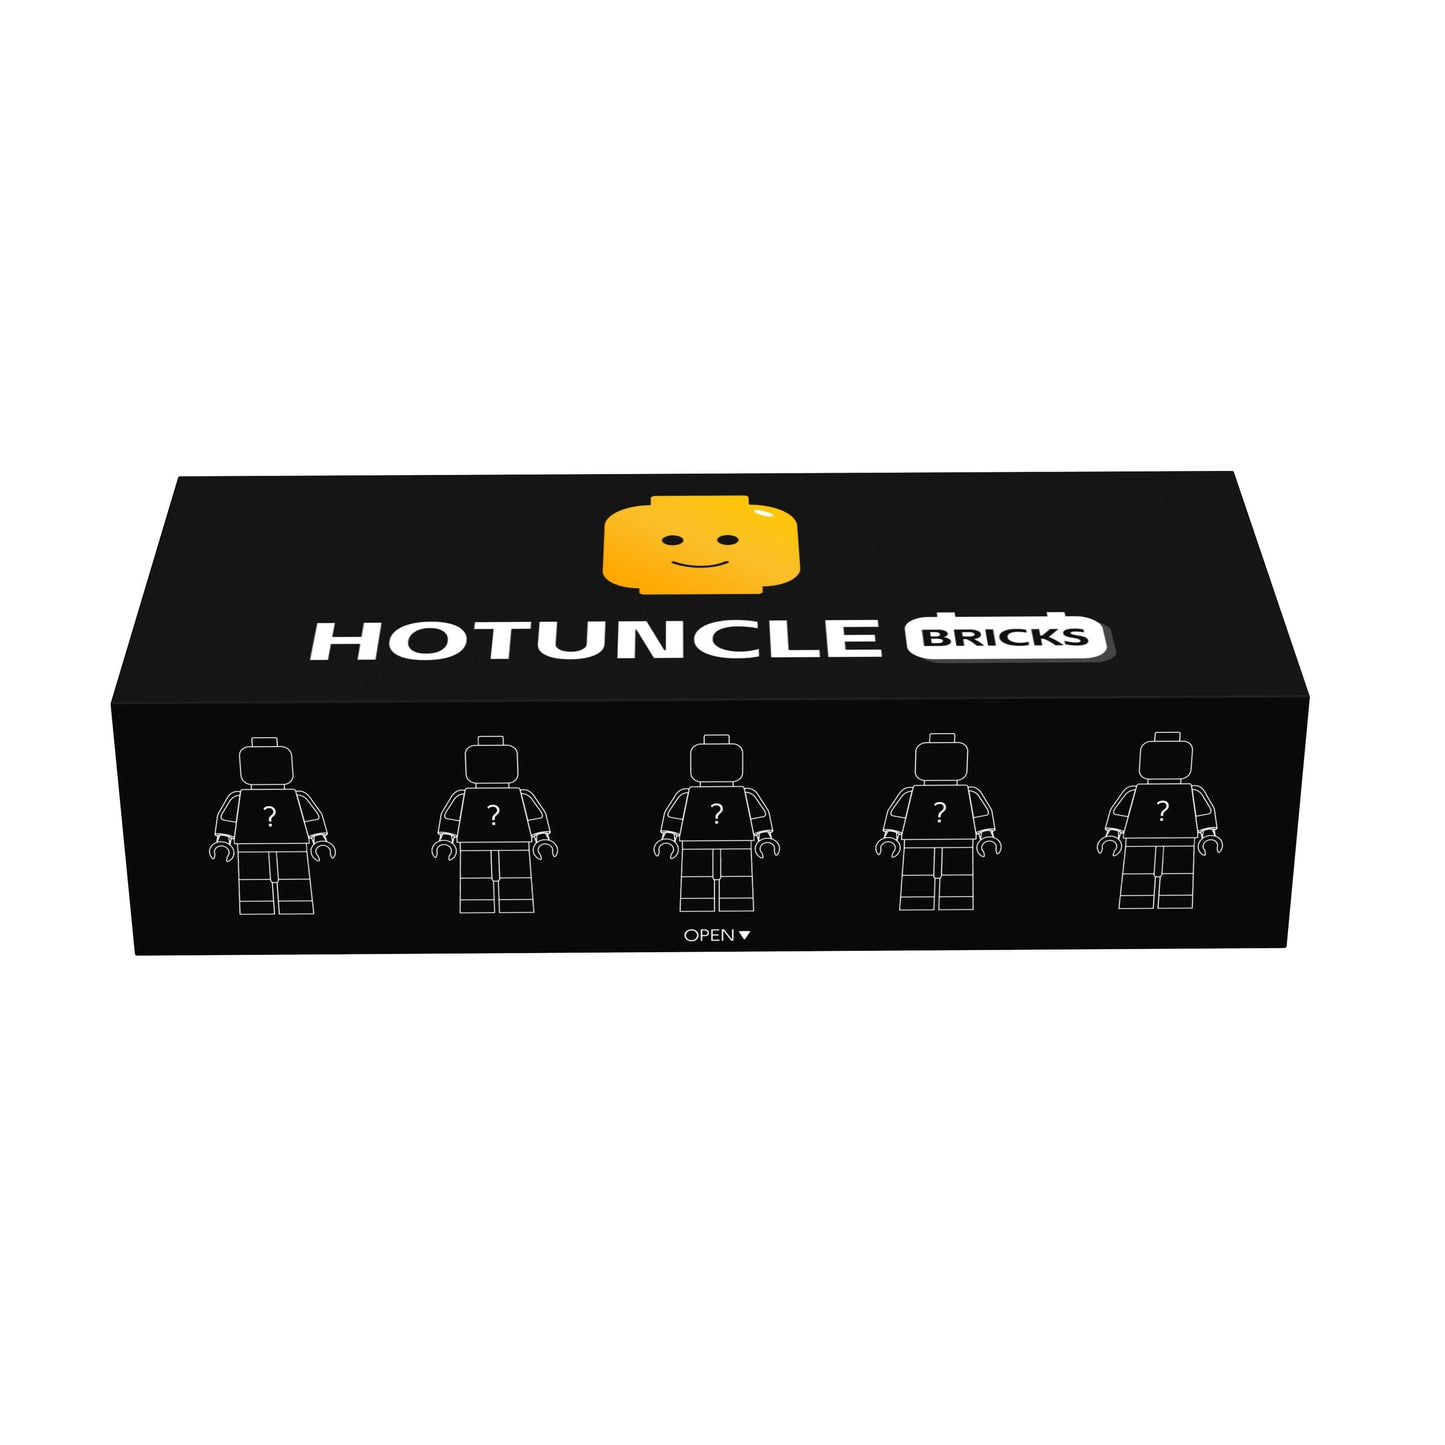 Hotuncle recommended | Premium Minifigures Blind Box